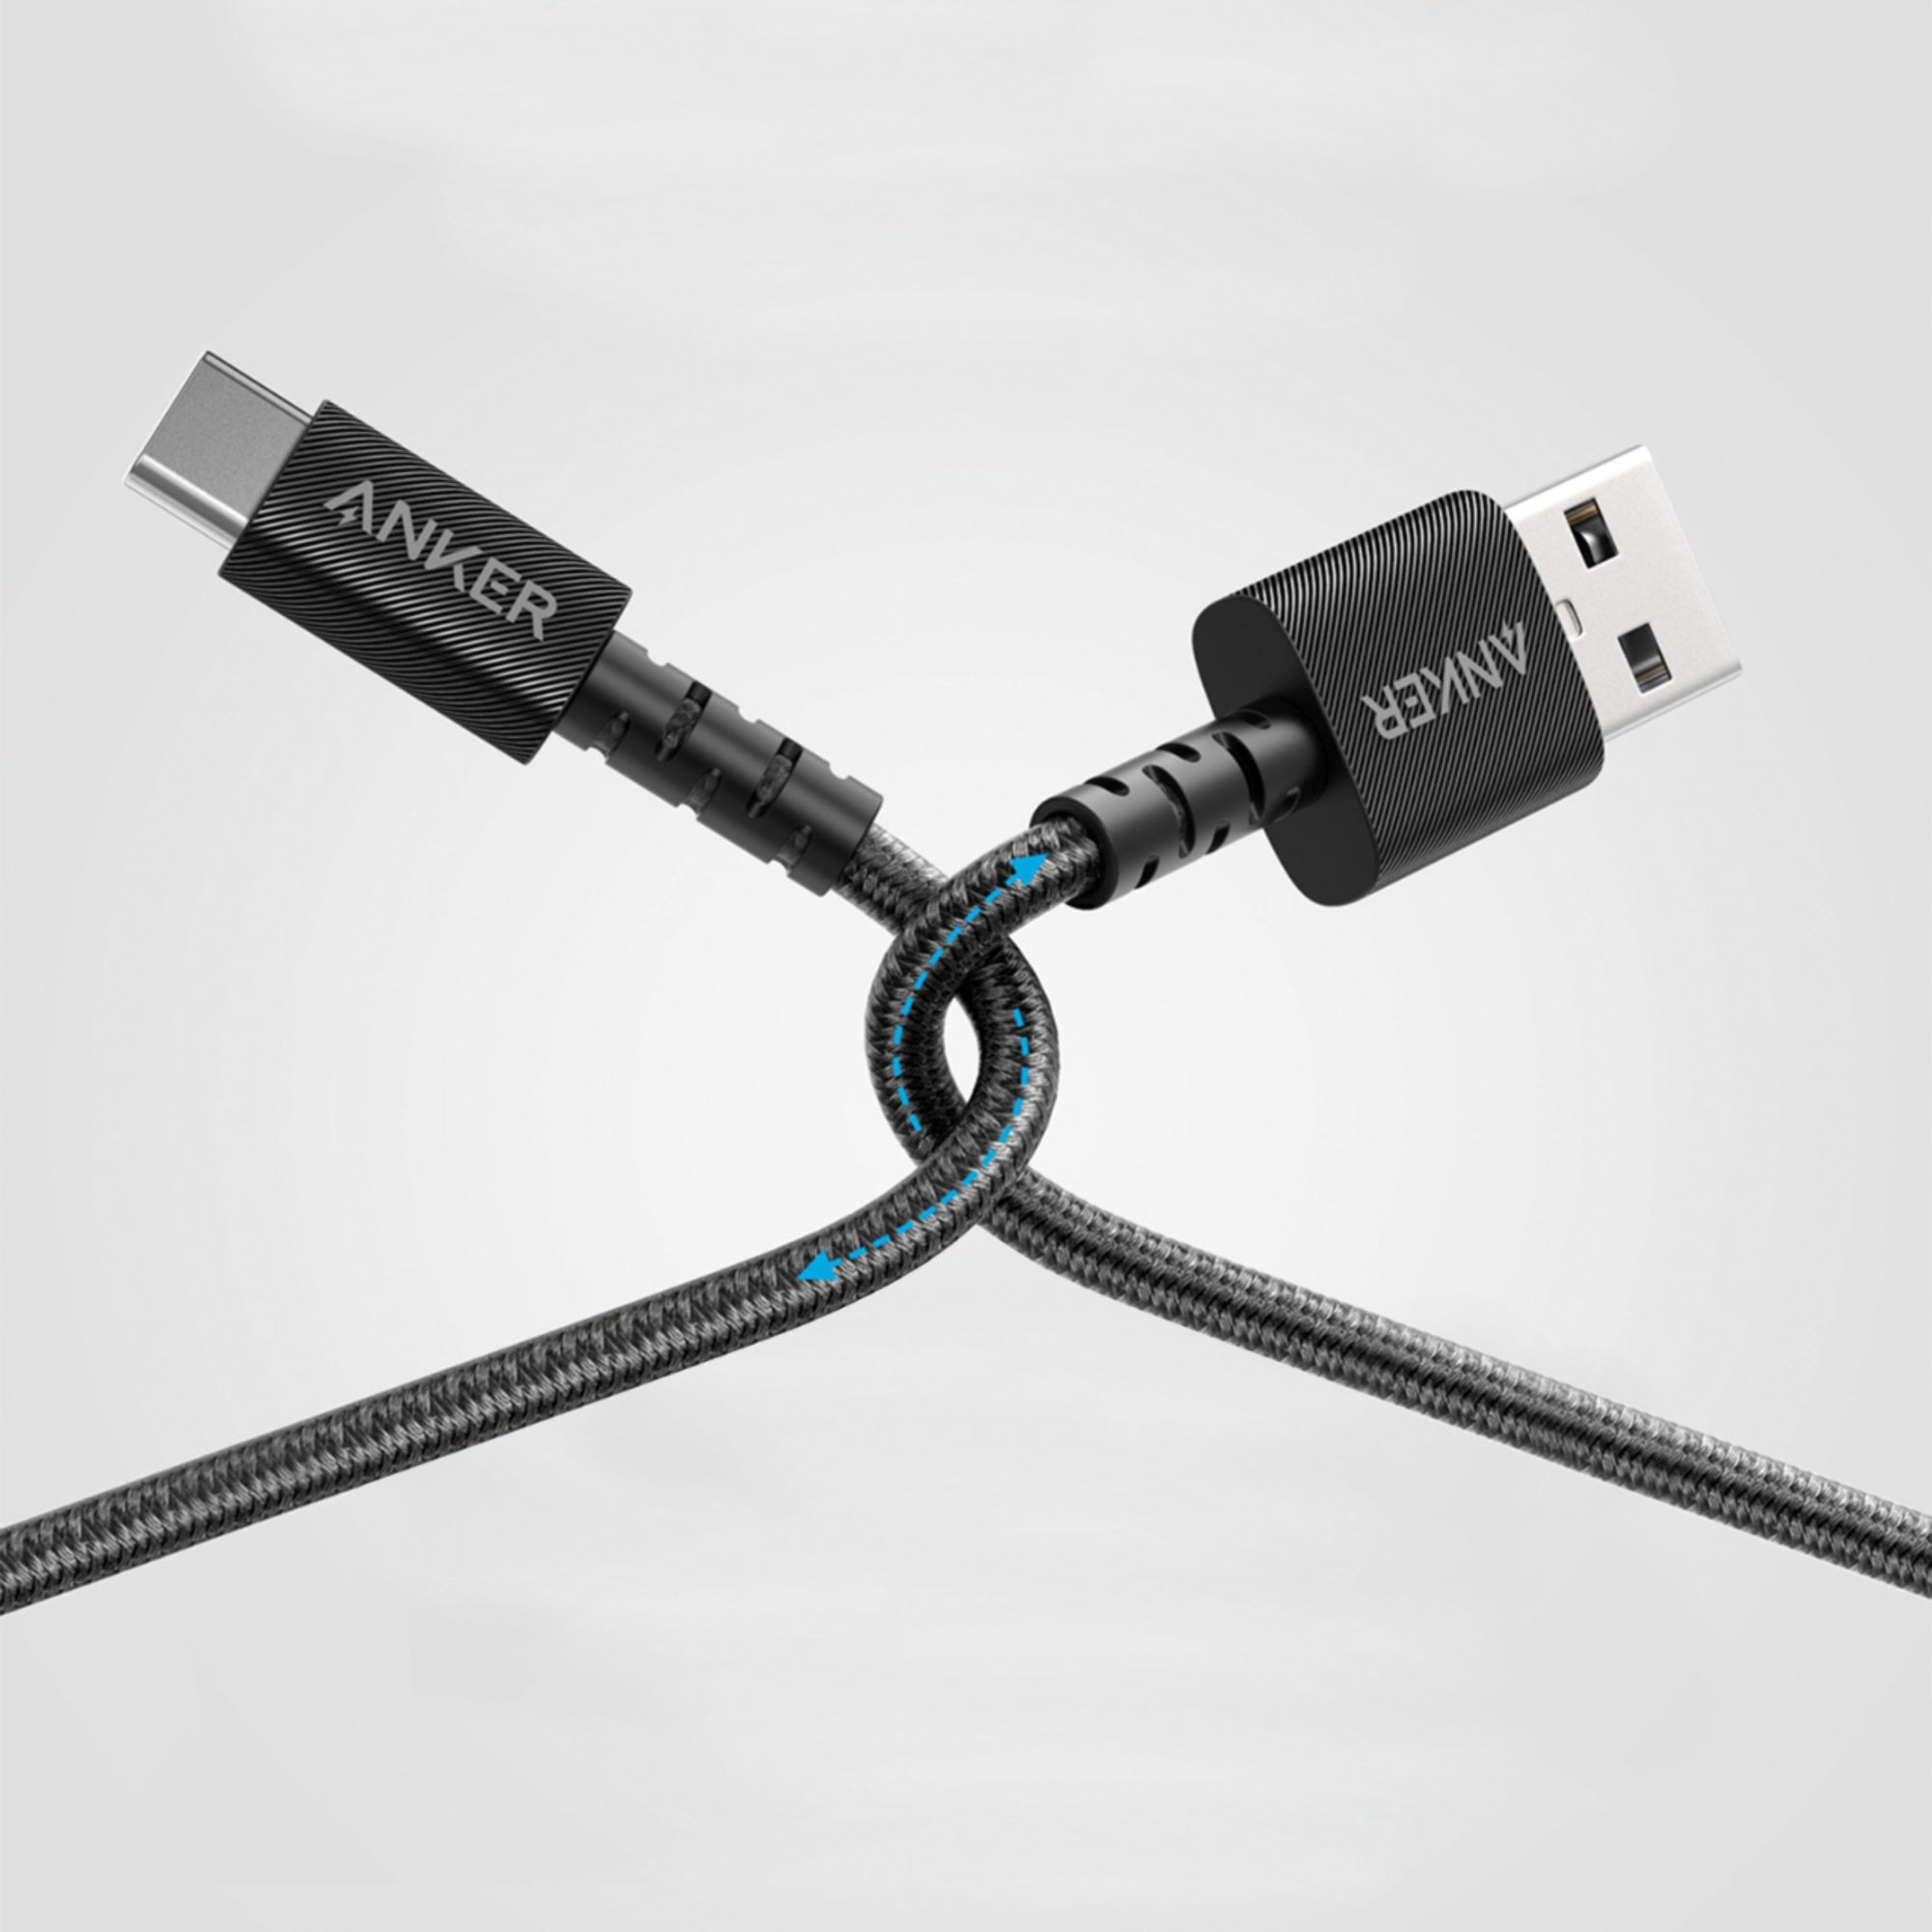 Anker - A8023H11-1 PowerLine Select+ USB-C to USB-A Cable 6-ft - Black